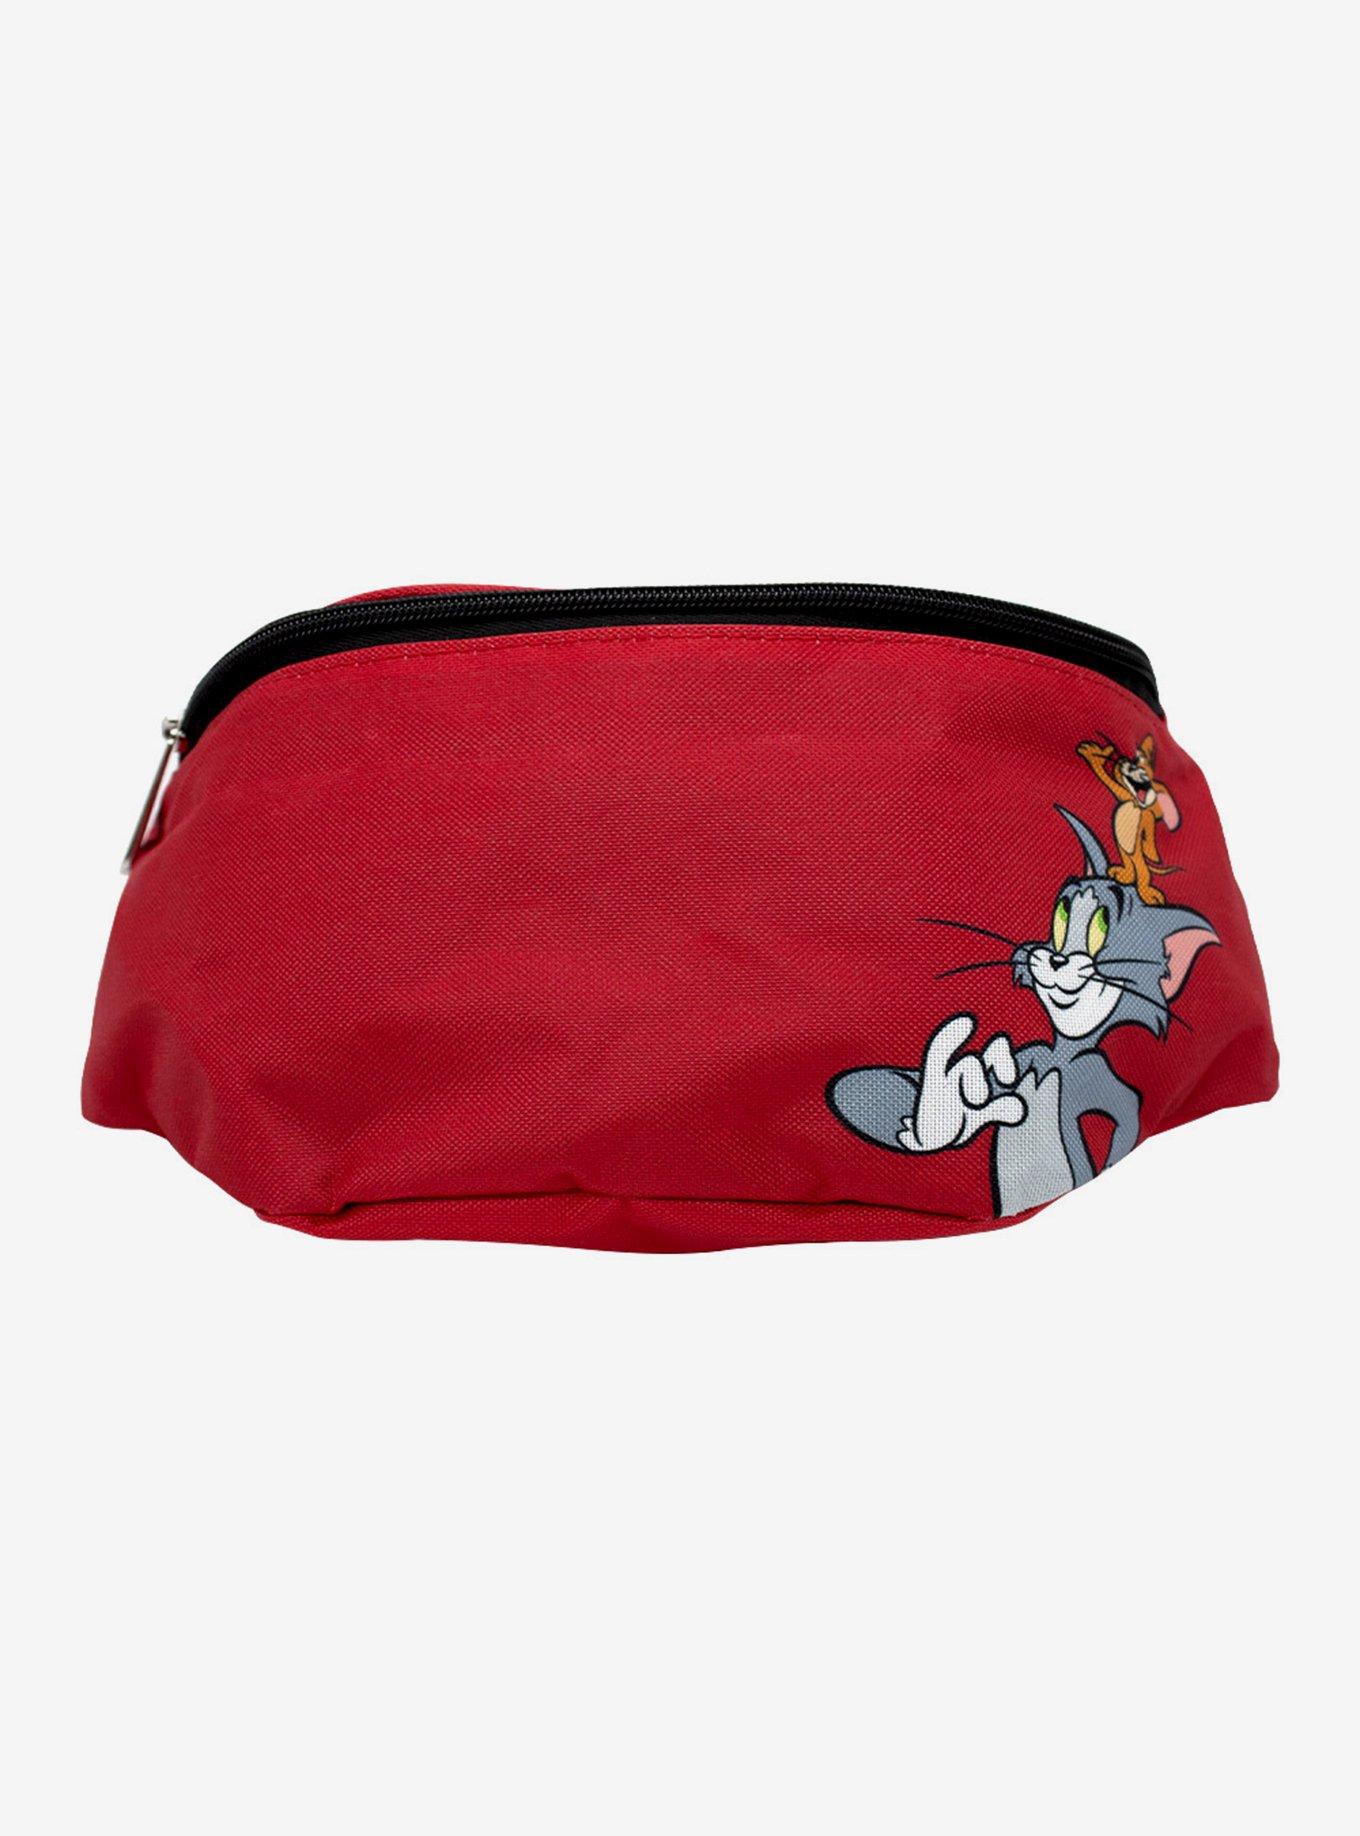 Tom And Jerry Smiling Pose Fanny Pack, , hi-res